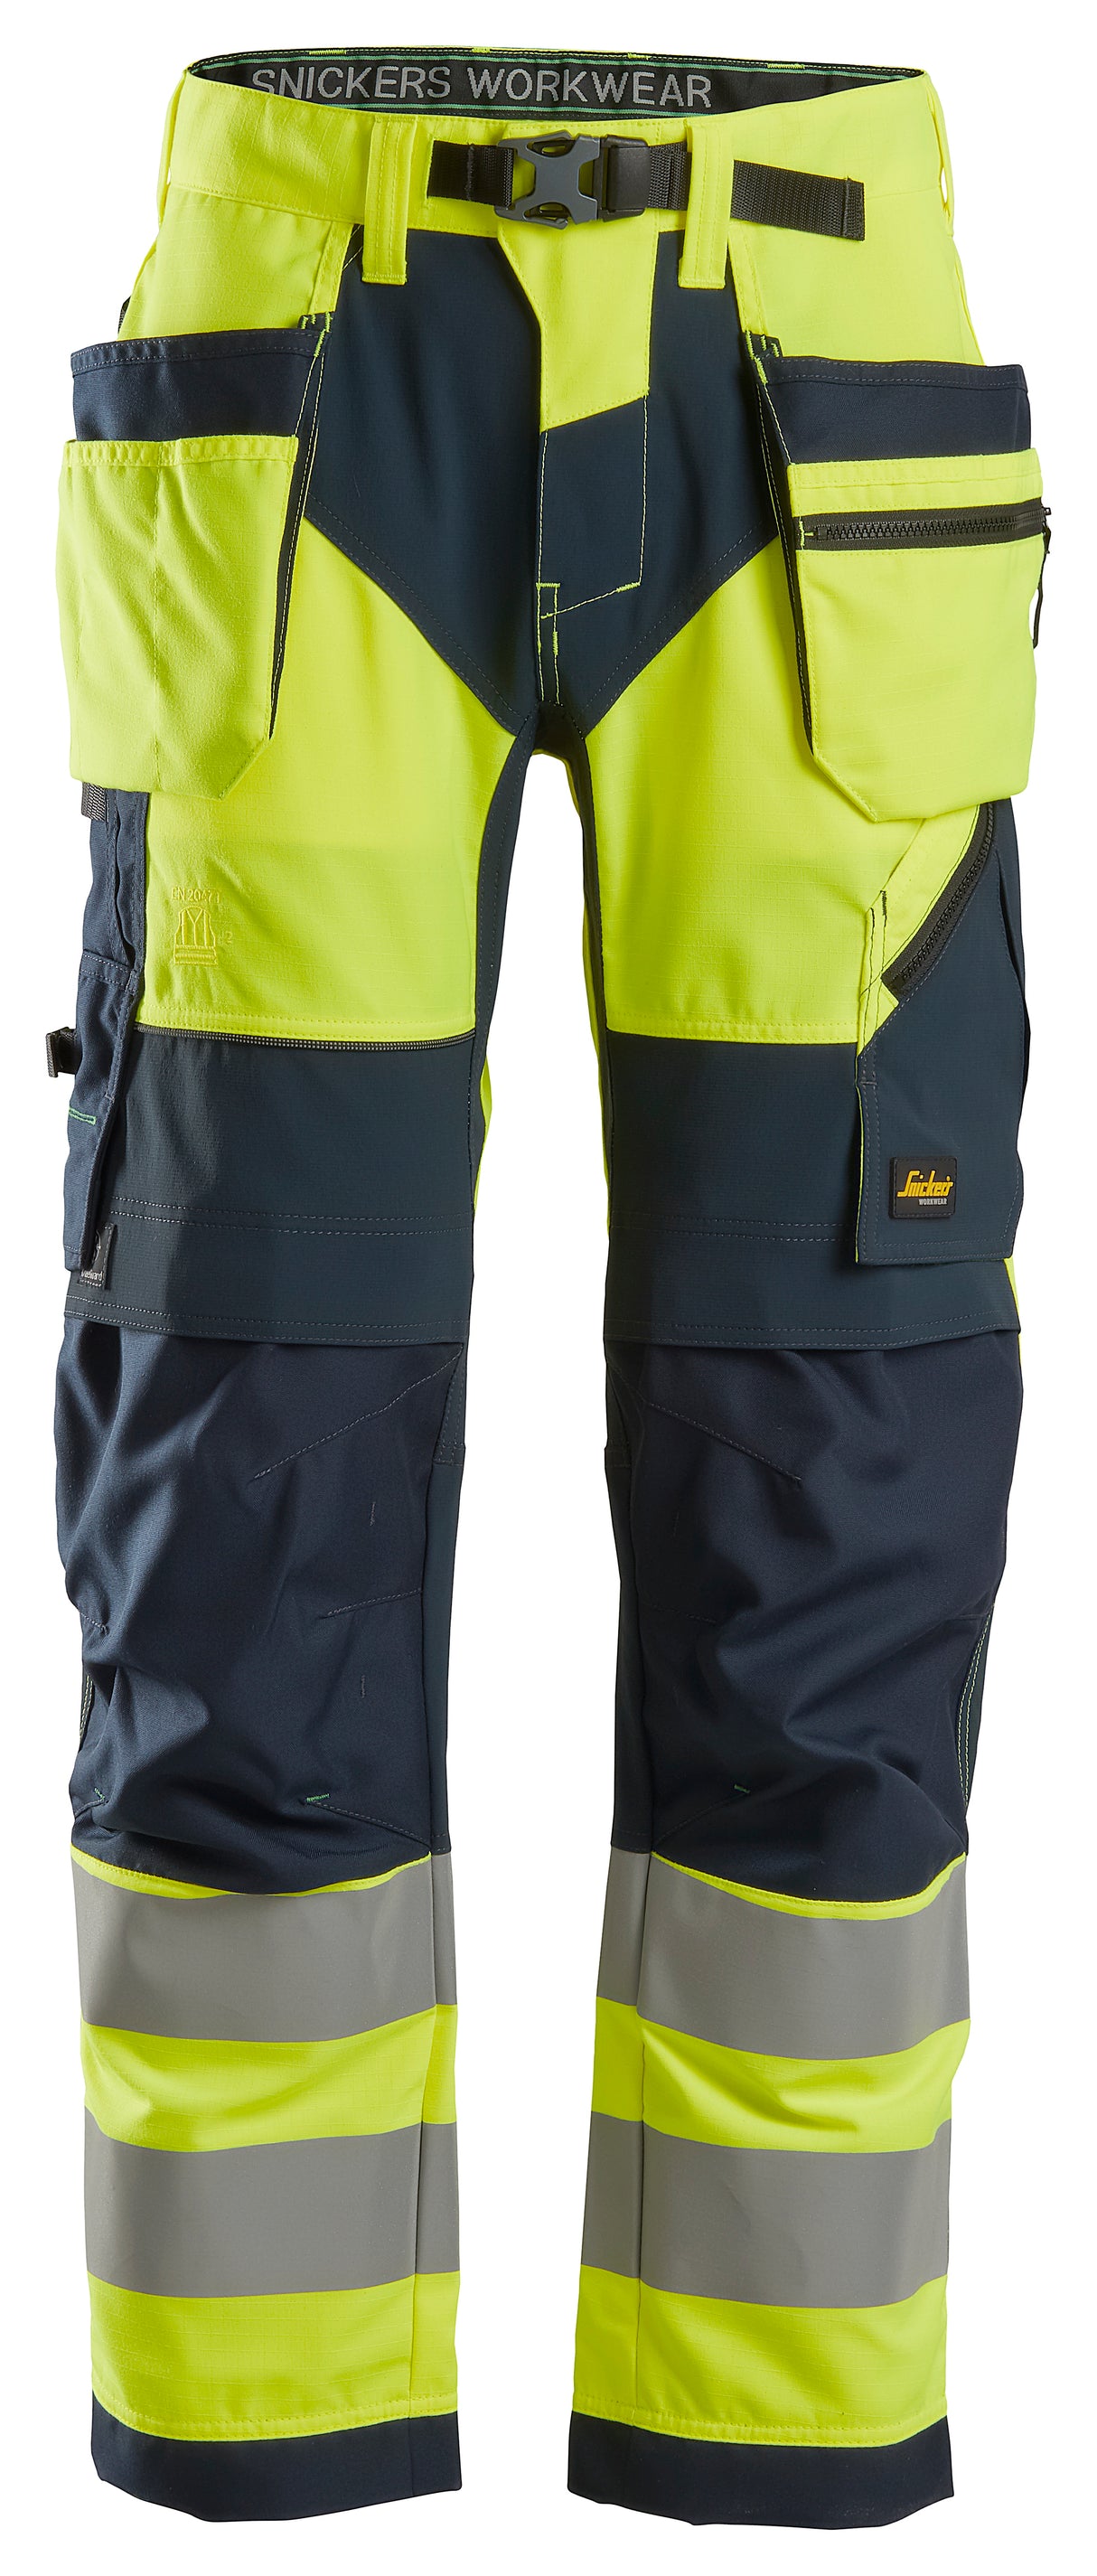 Snickers 6932 Flexiwork Hi-vis Work Trousers Holster pocket Class 2 Yellow - Navy